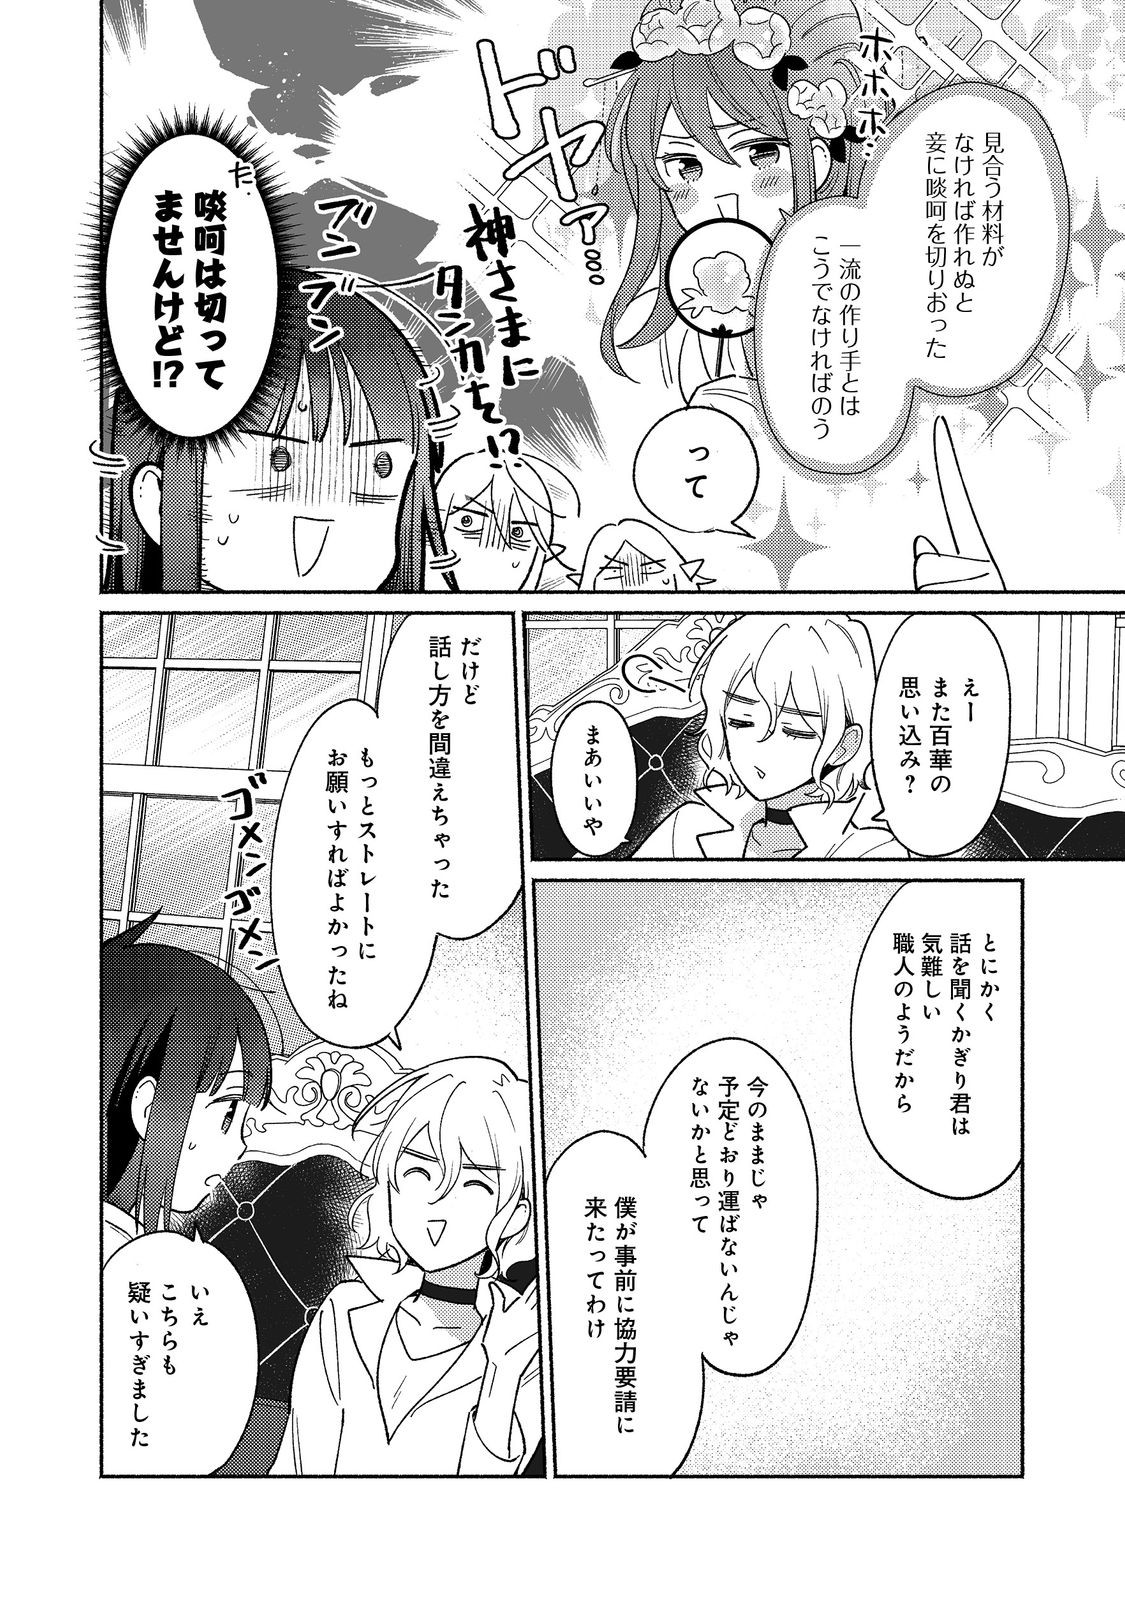 I’m the White Pig Nobleman 第19.2話 - Page 4